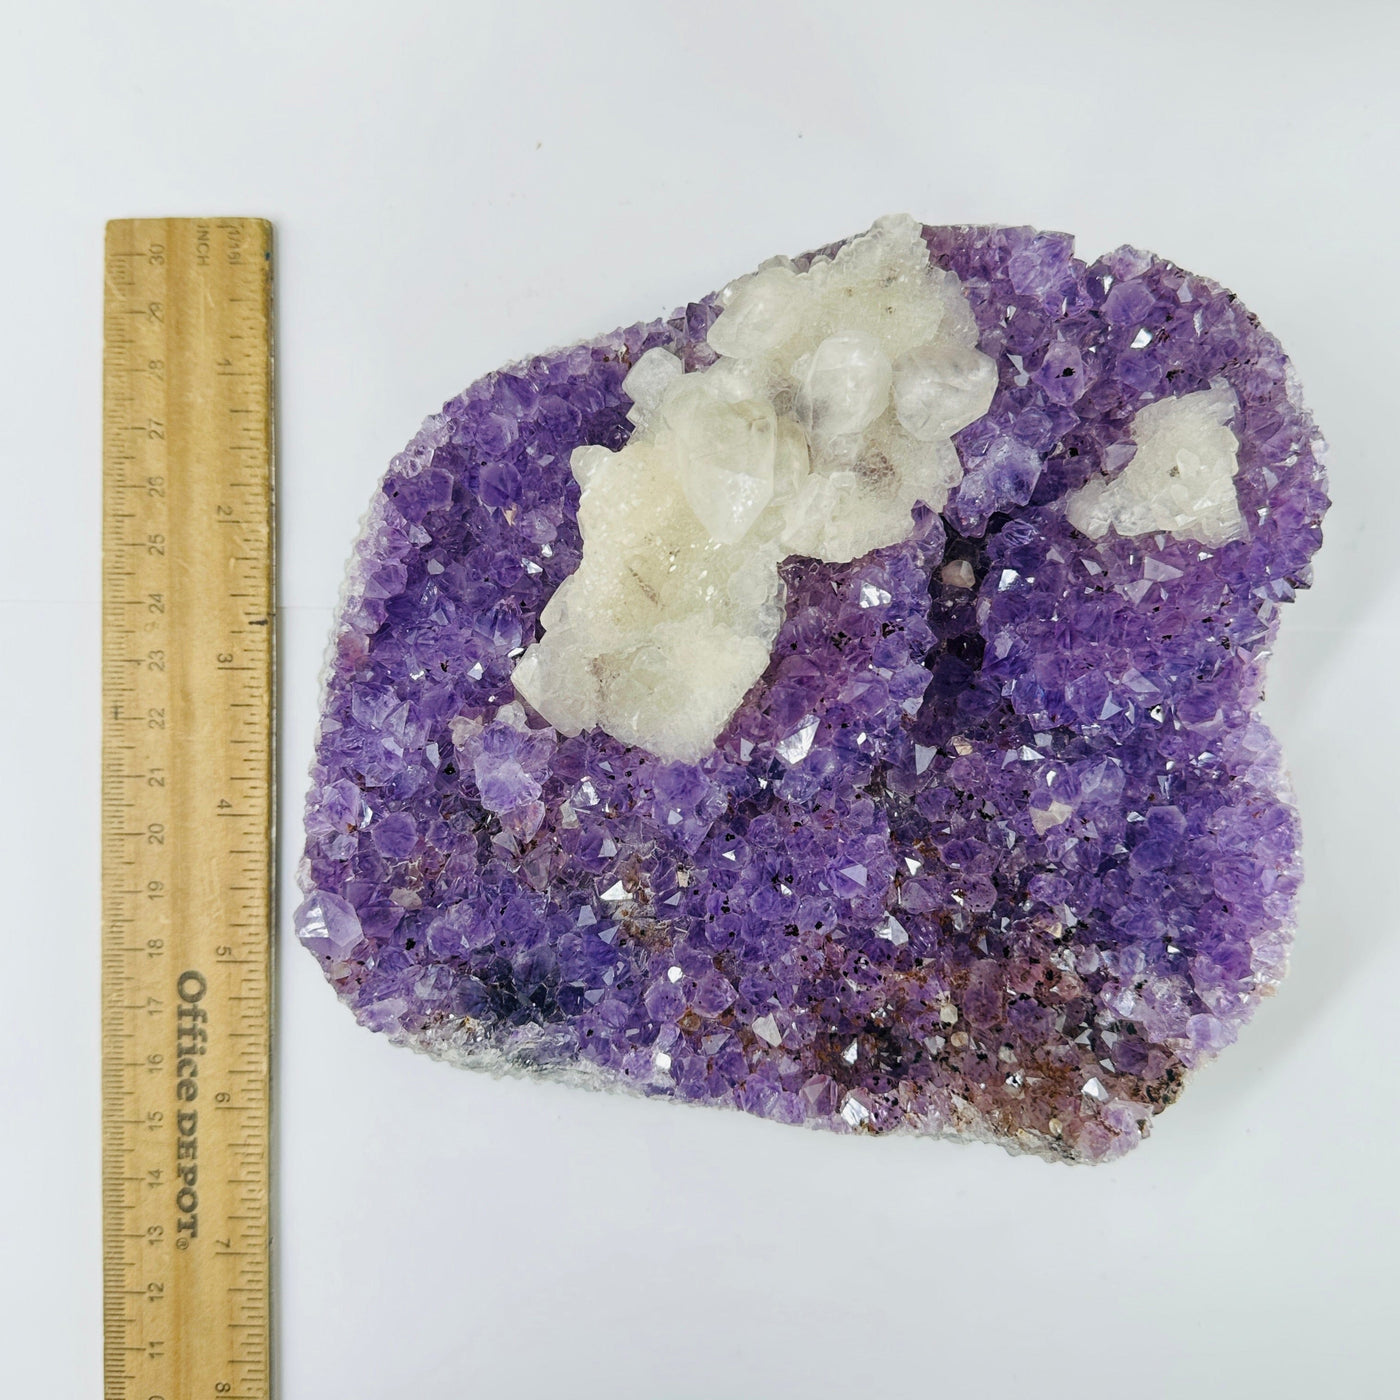 amethyst cluster next to a ruler for size reference